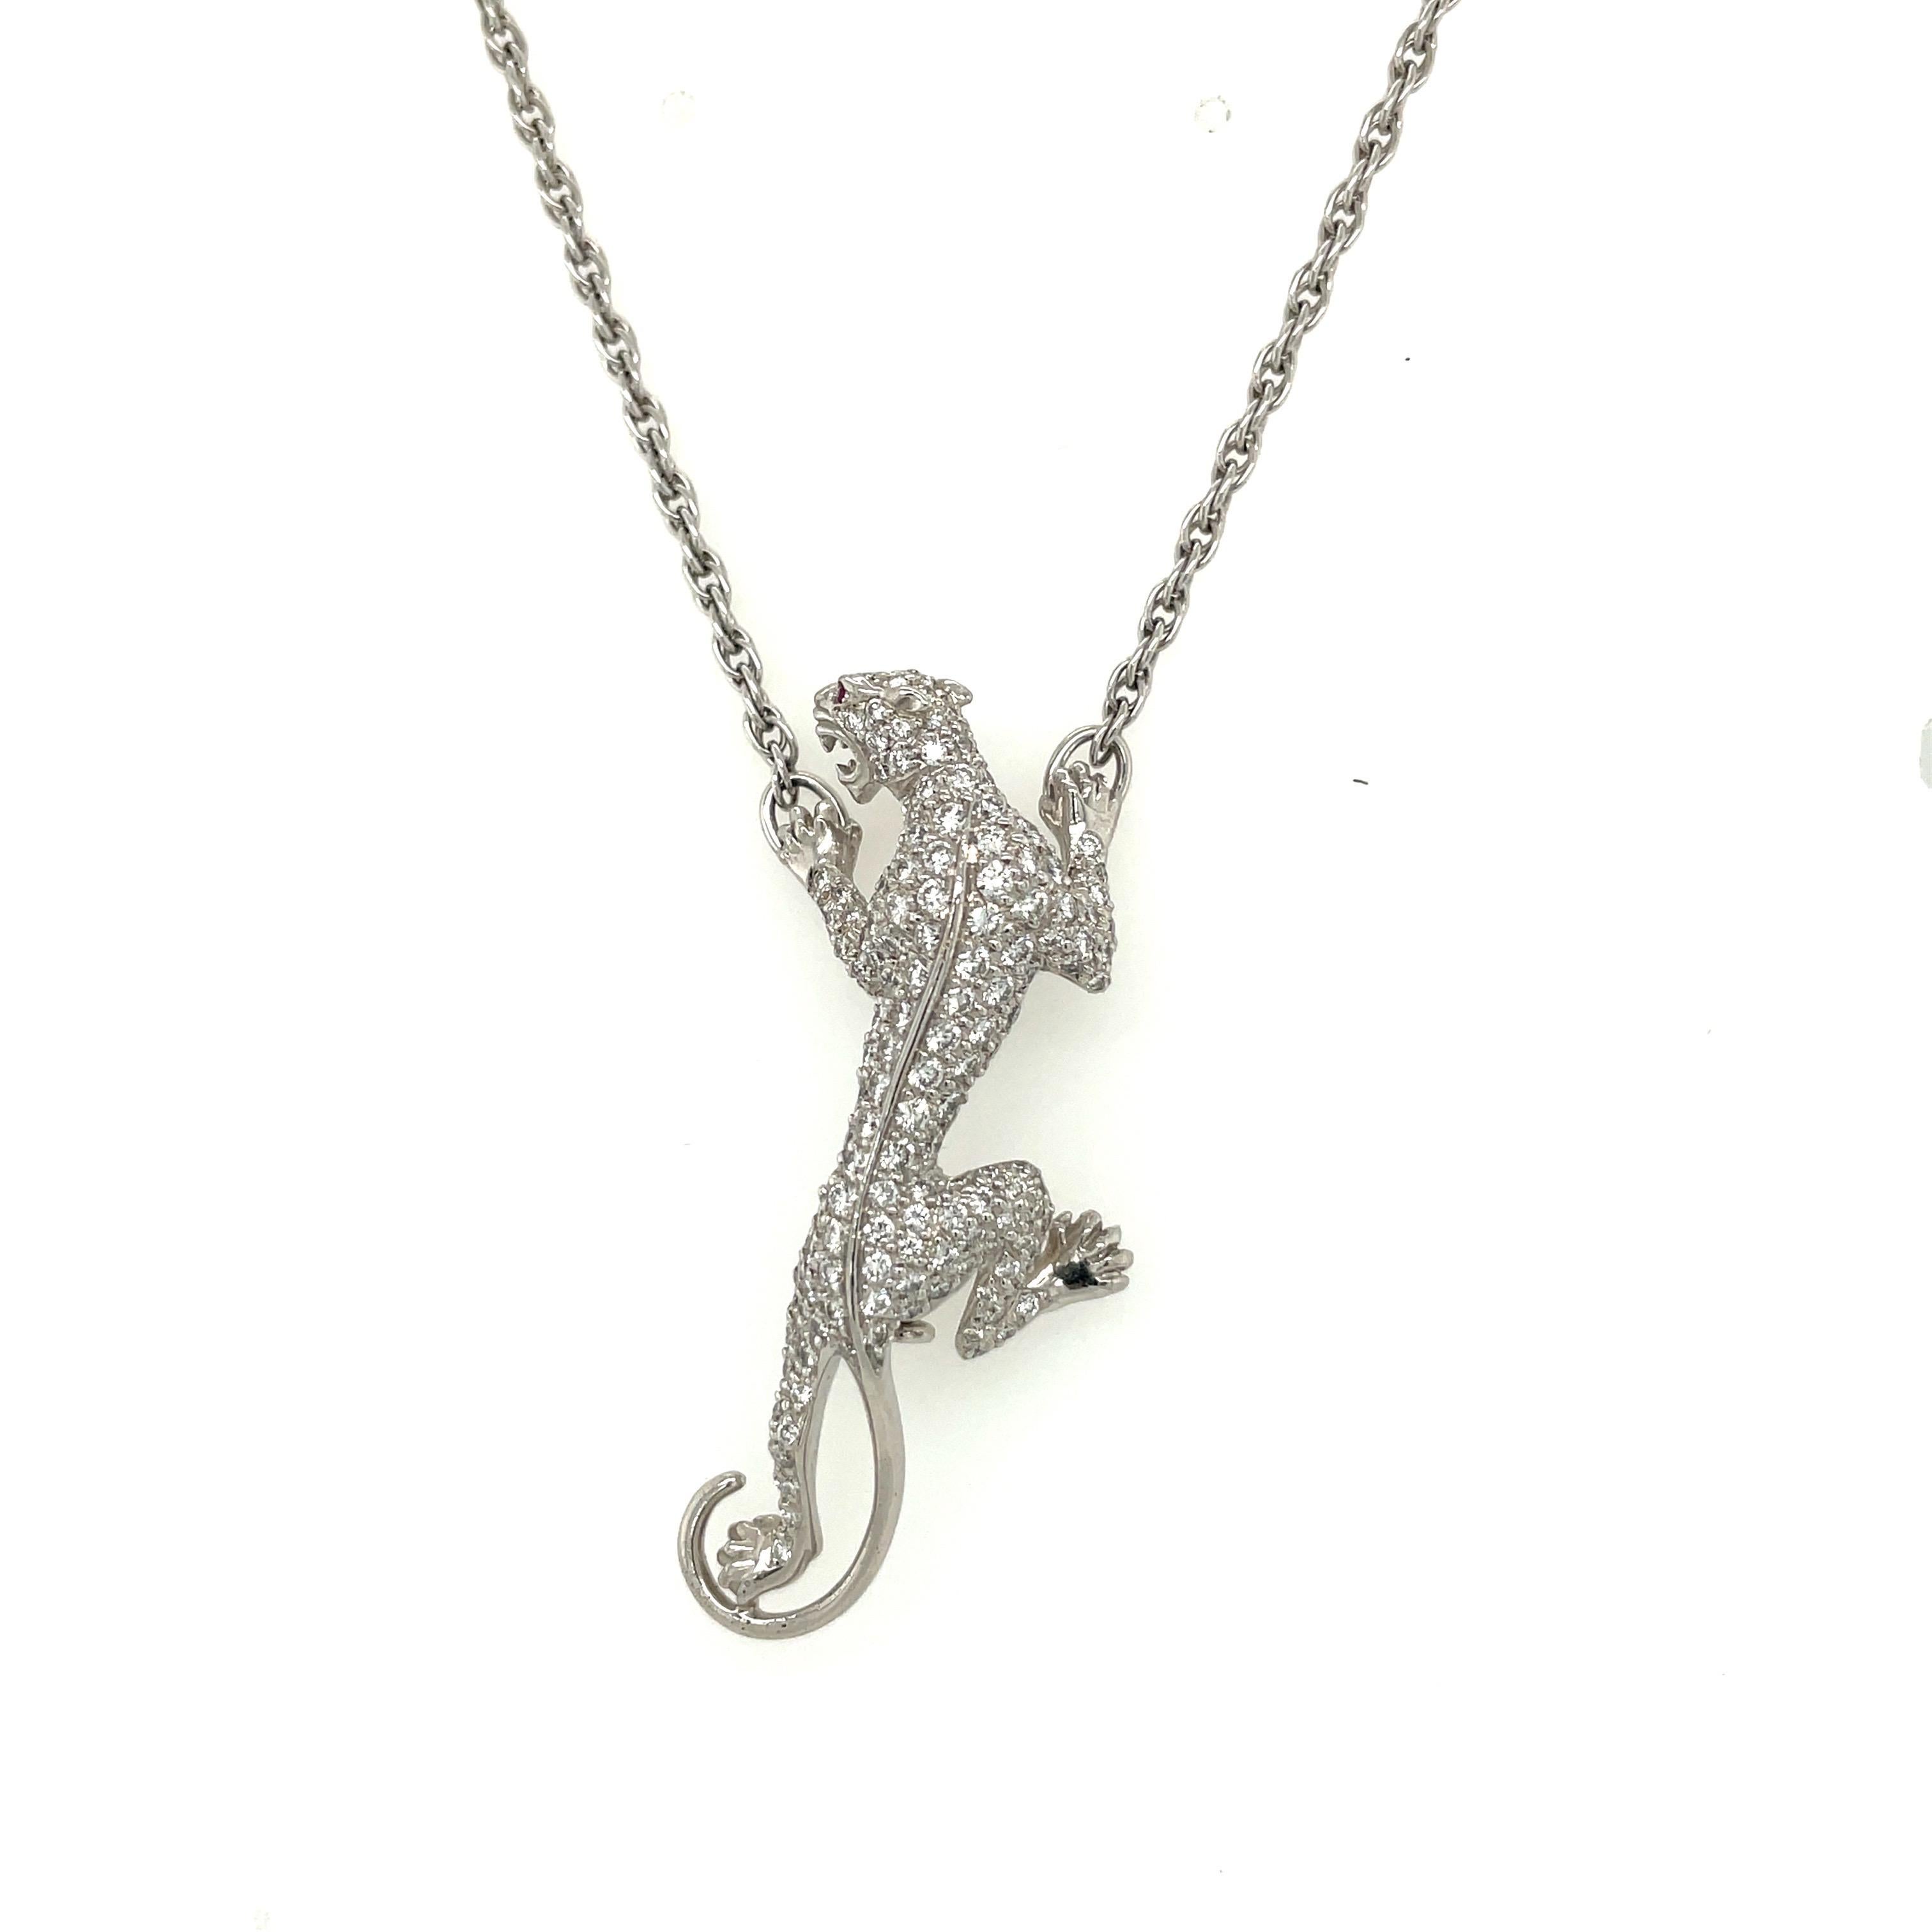 Carrera Y Carrera has built its famous name on figurative designs, an obsession with surface finishes, and a compelling way of seeing beauty in art and nature. This 18 karat white gold diamond panther pendant is a perfect example of Carrera's iconic